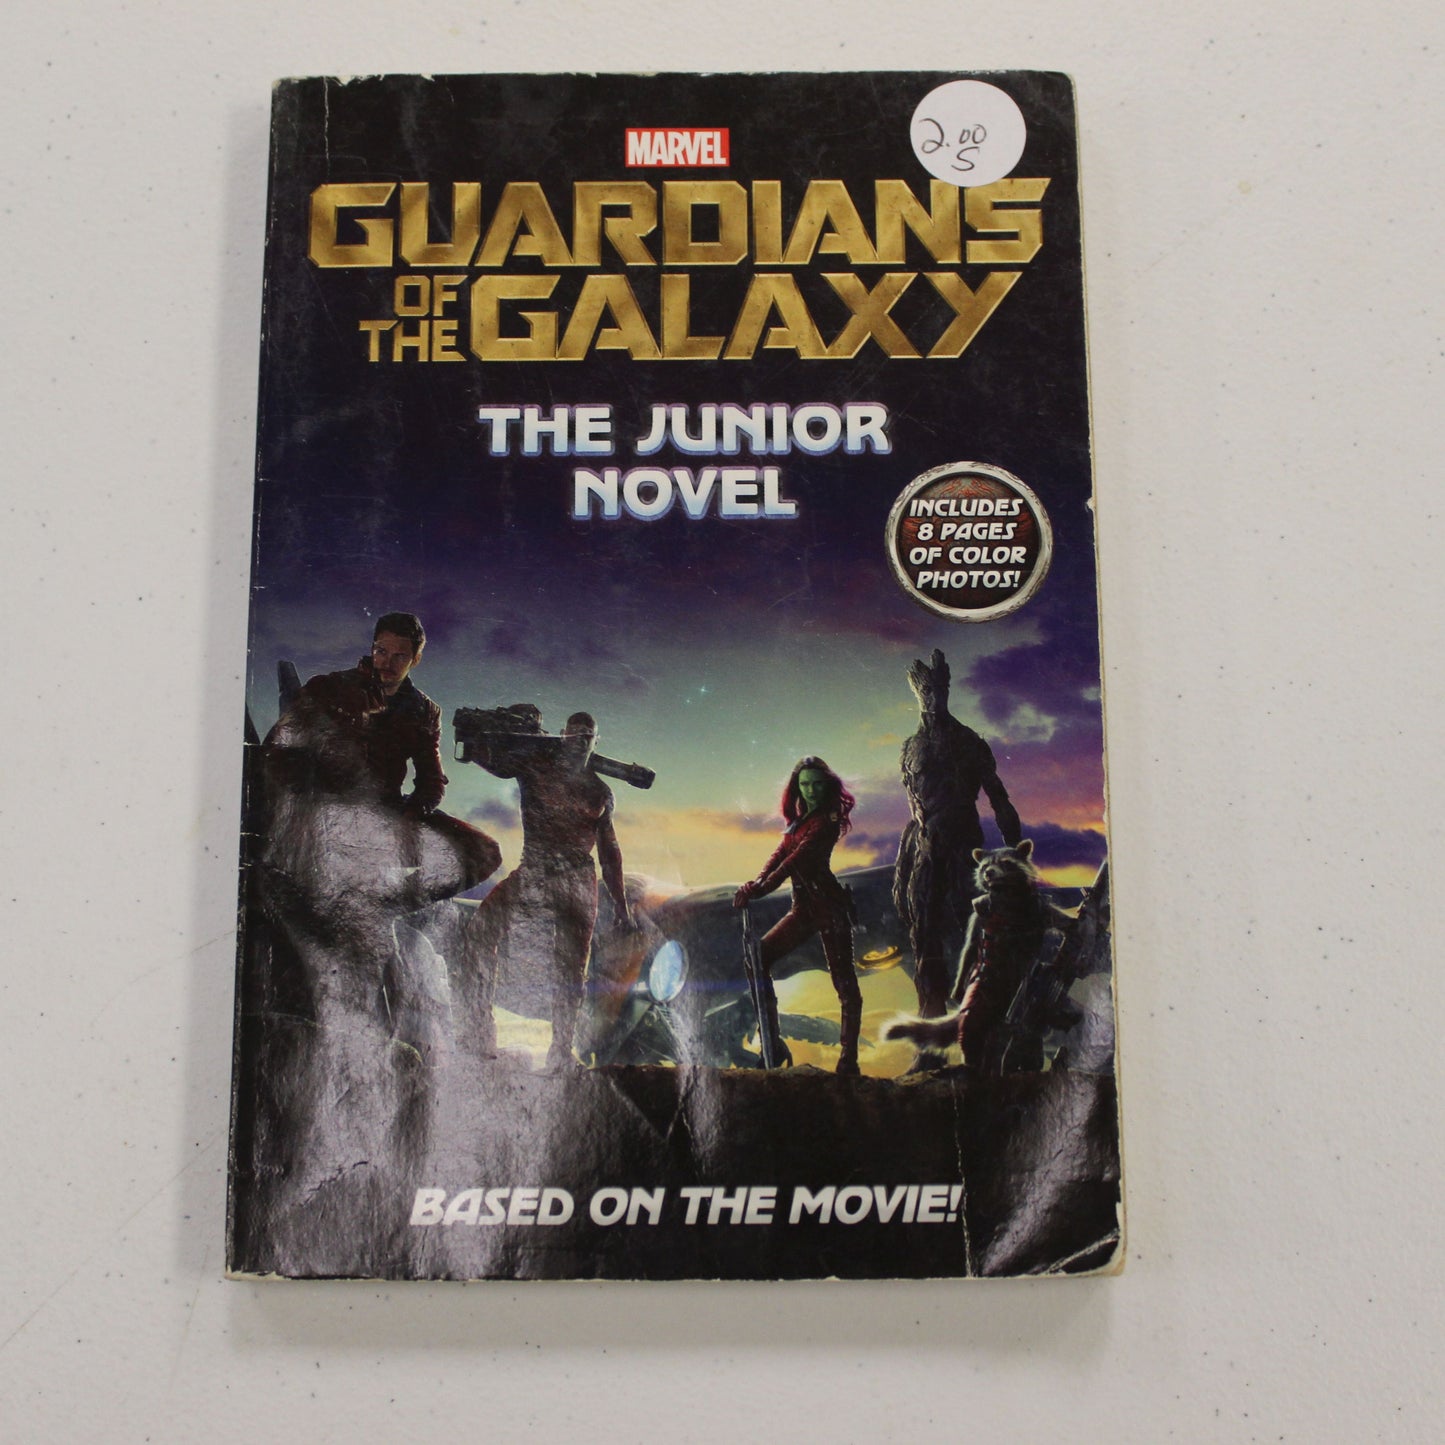 GUARDIANS OF THE GALAXY THE JUNIOR NOVEL